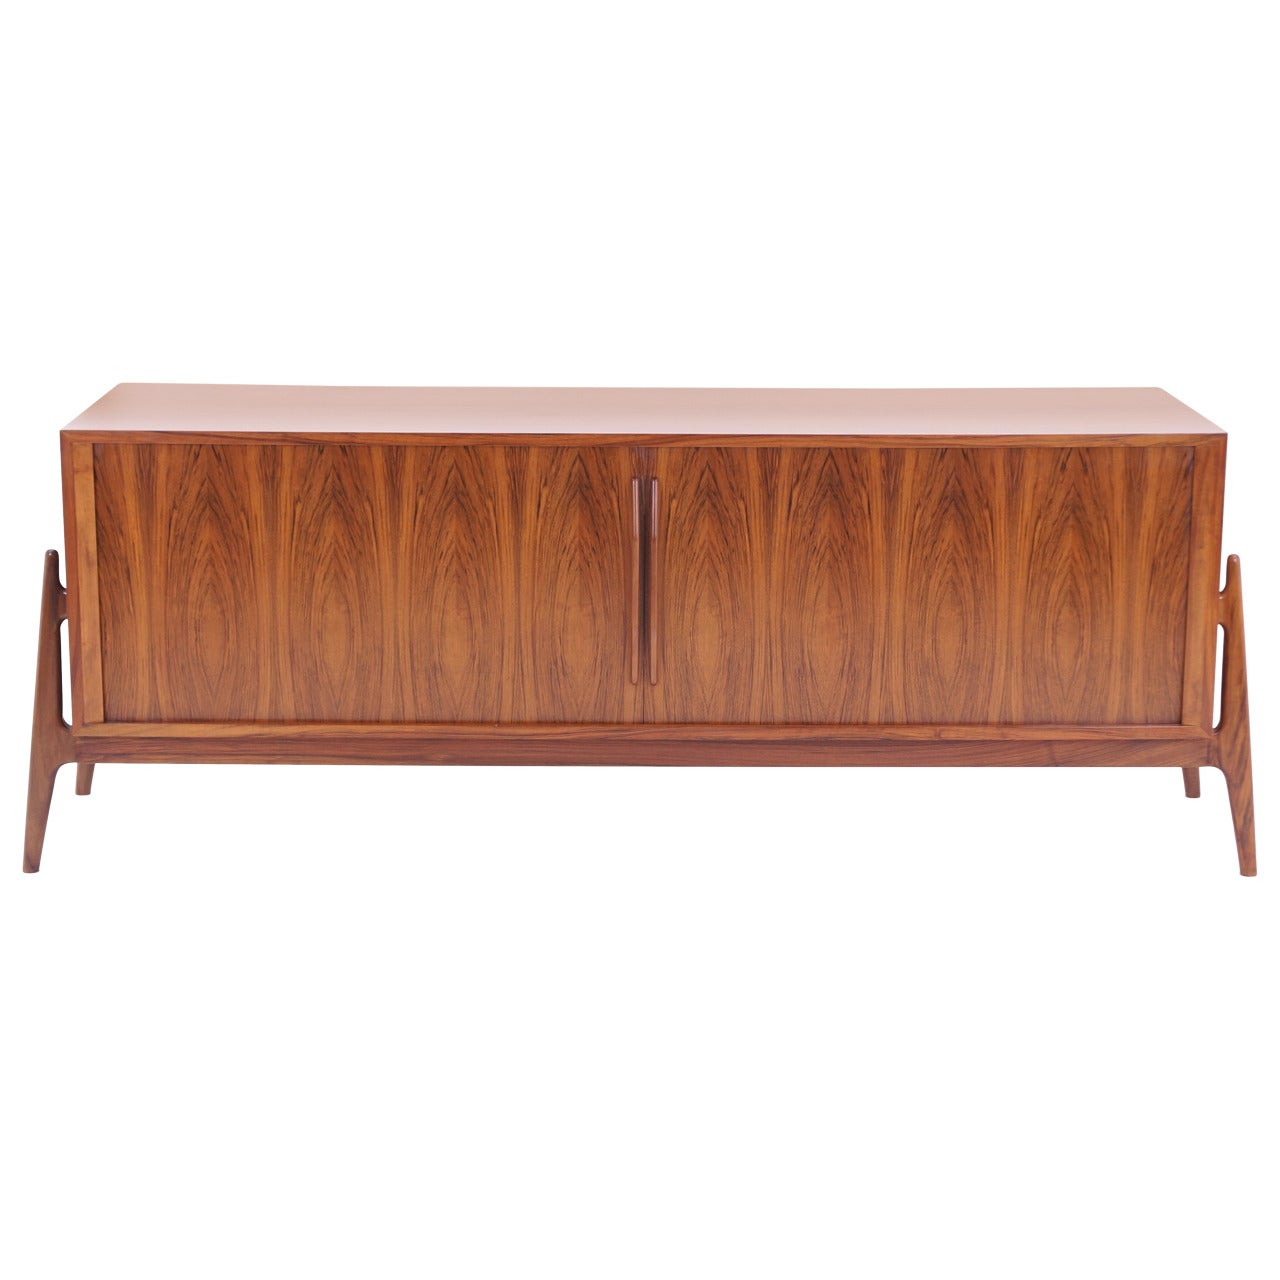 Rosewood Credenza with Tambour Doors Attributed to Finn Juhl.  Very Large.